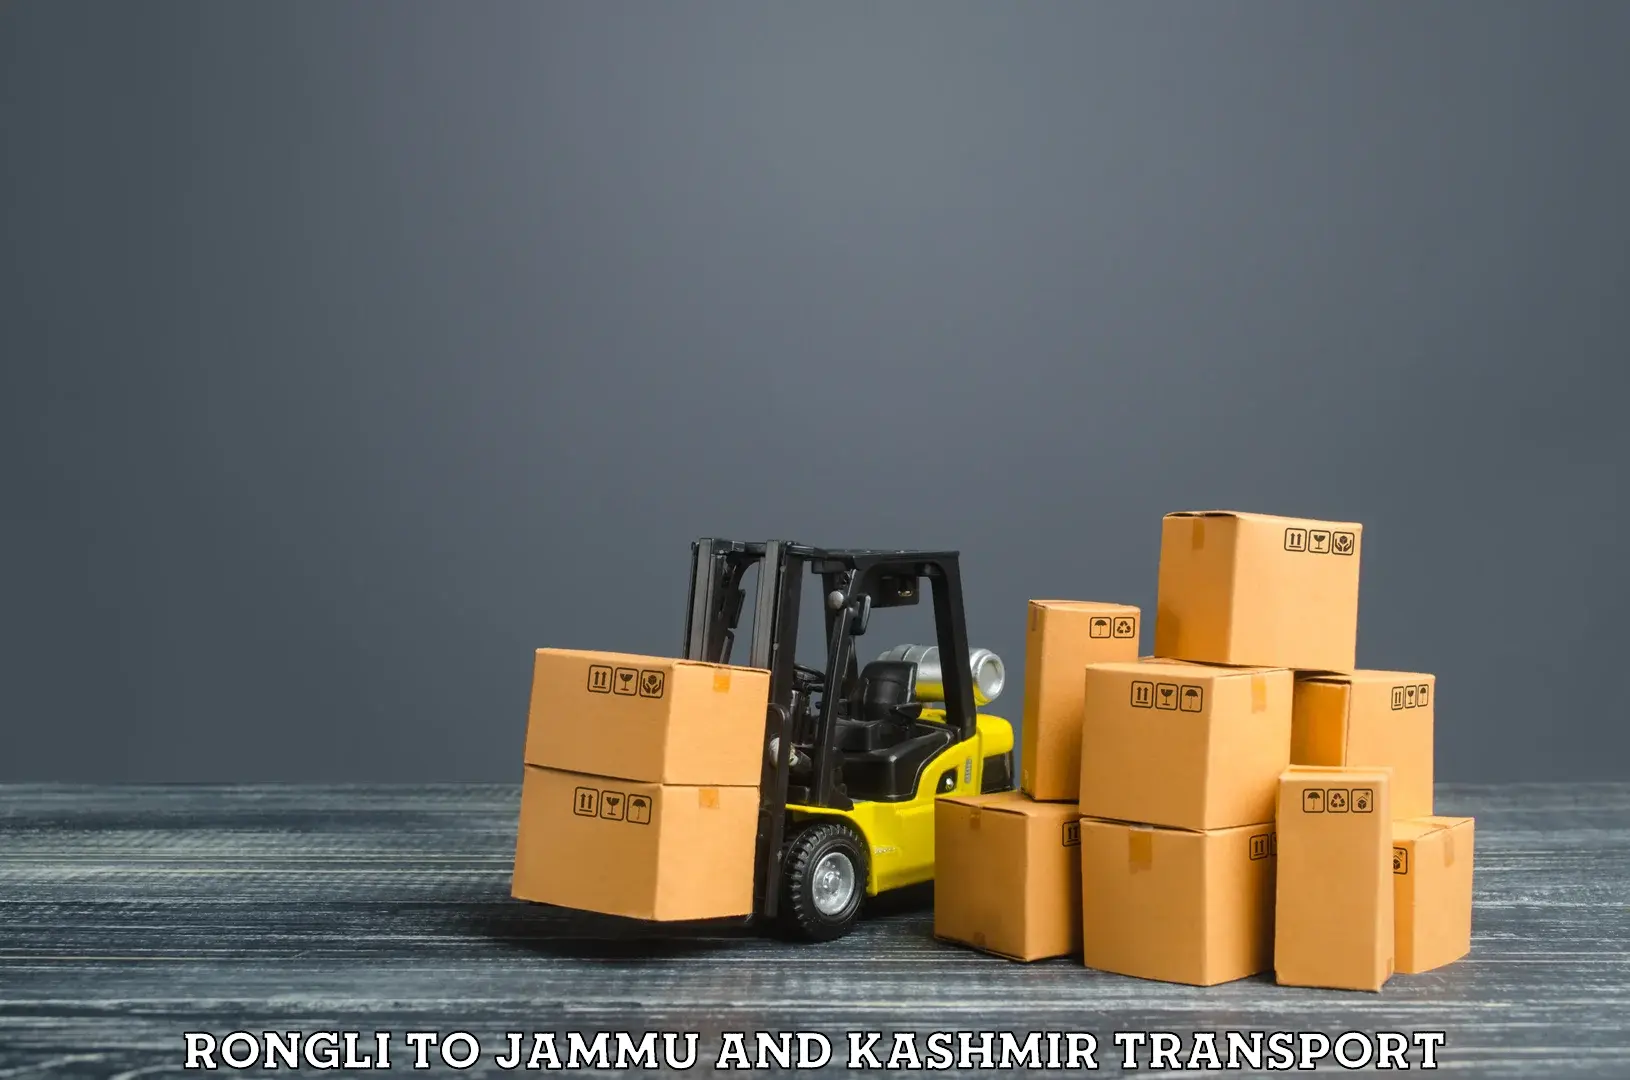 Container transport service Rongli to Pulwama